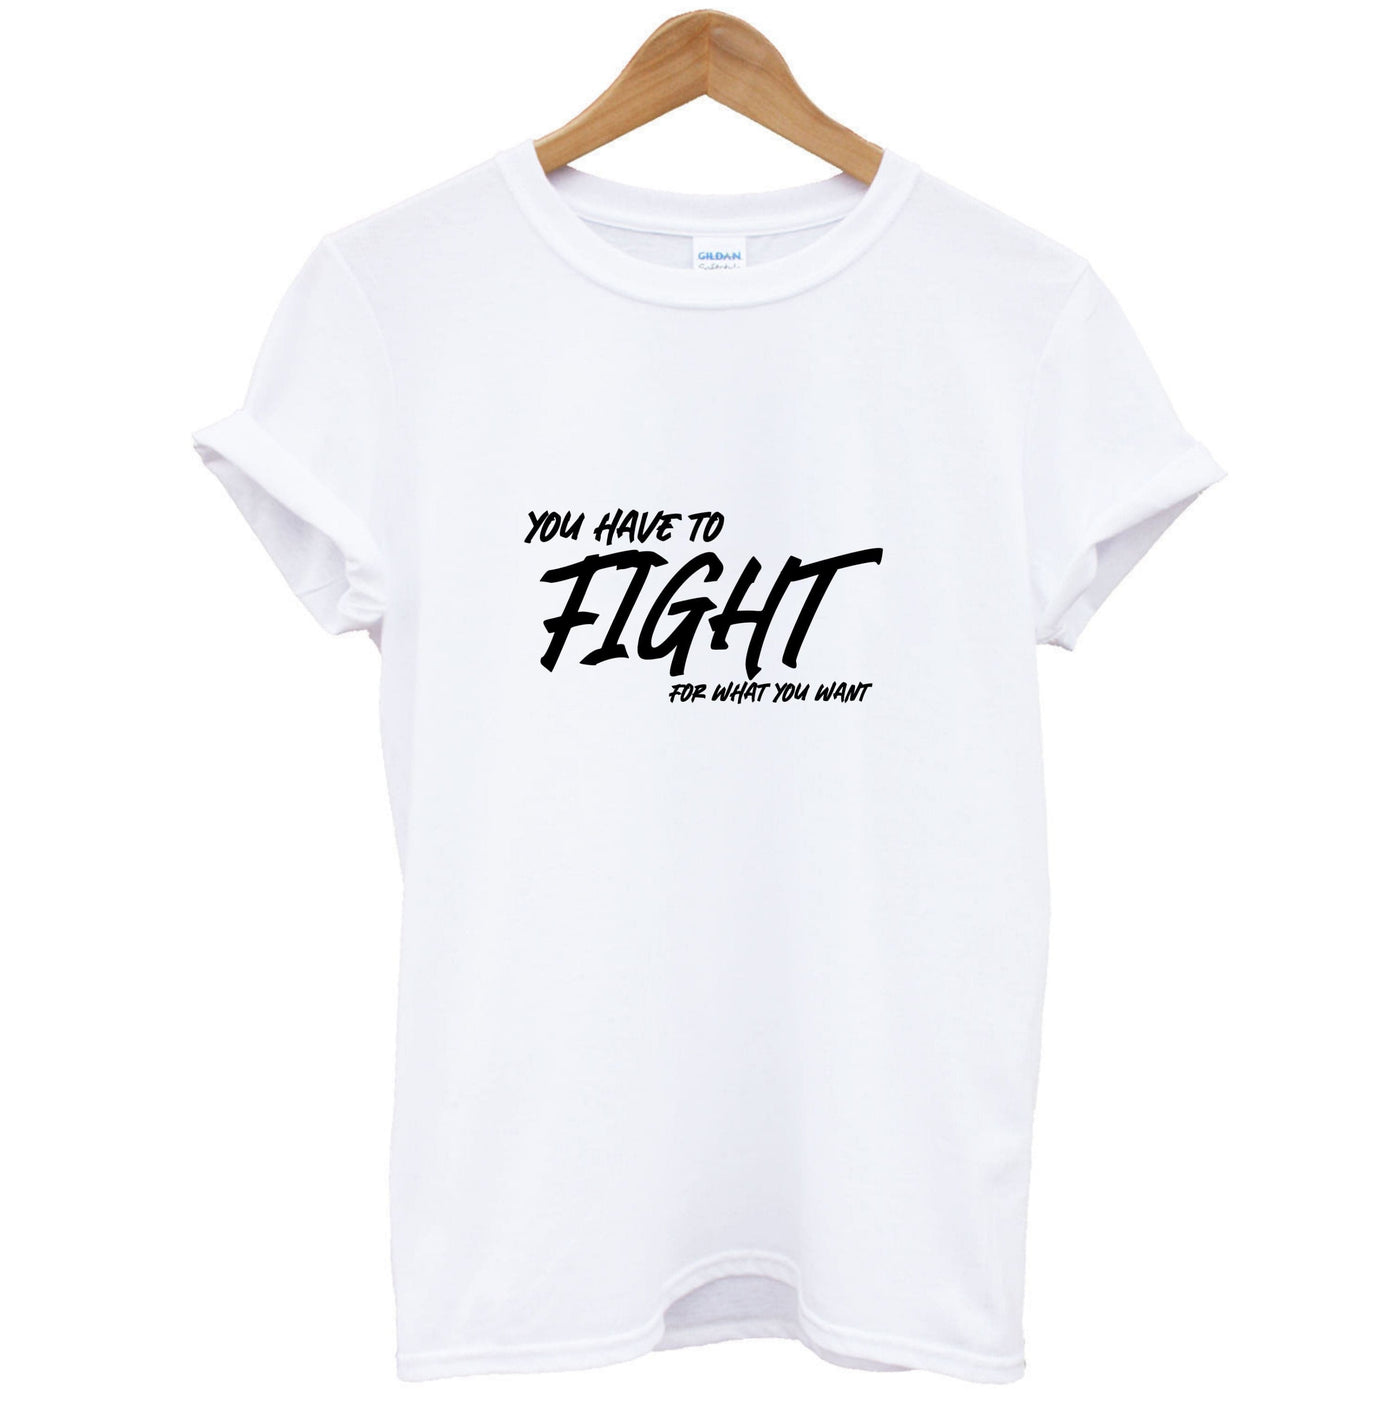 You Have To Fight - Top Boy T-Shirt